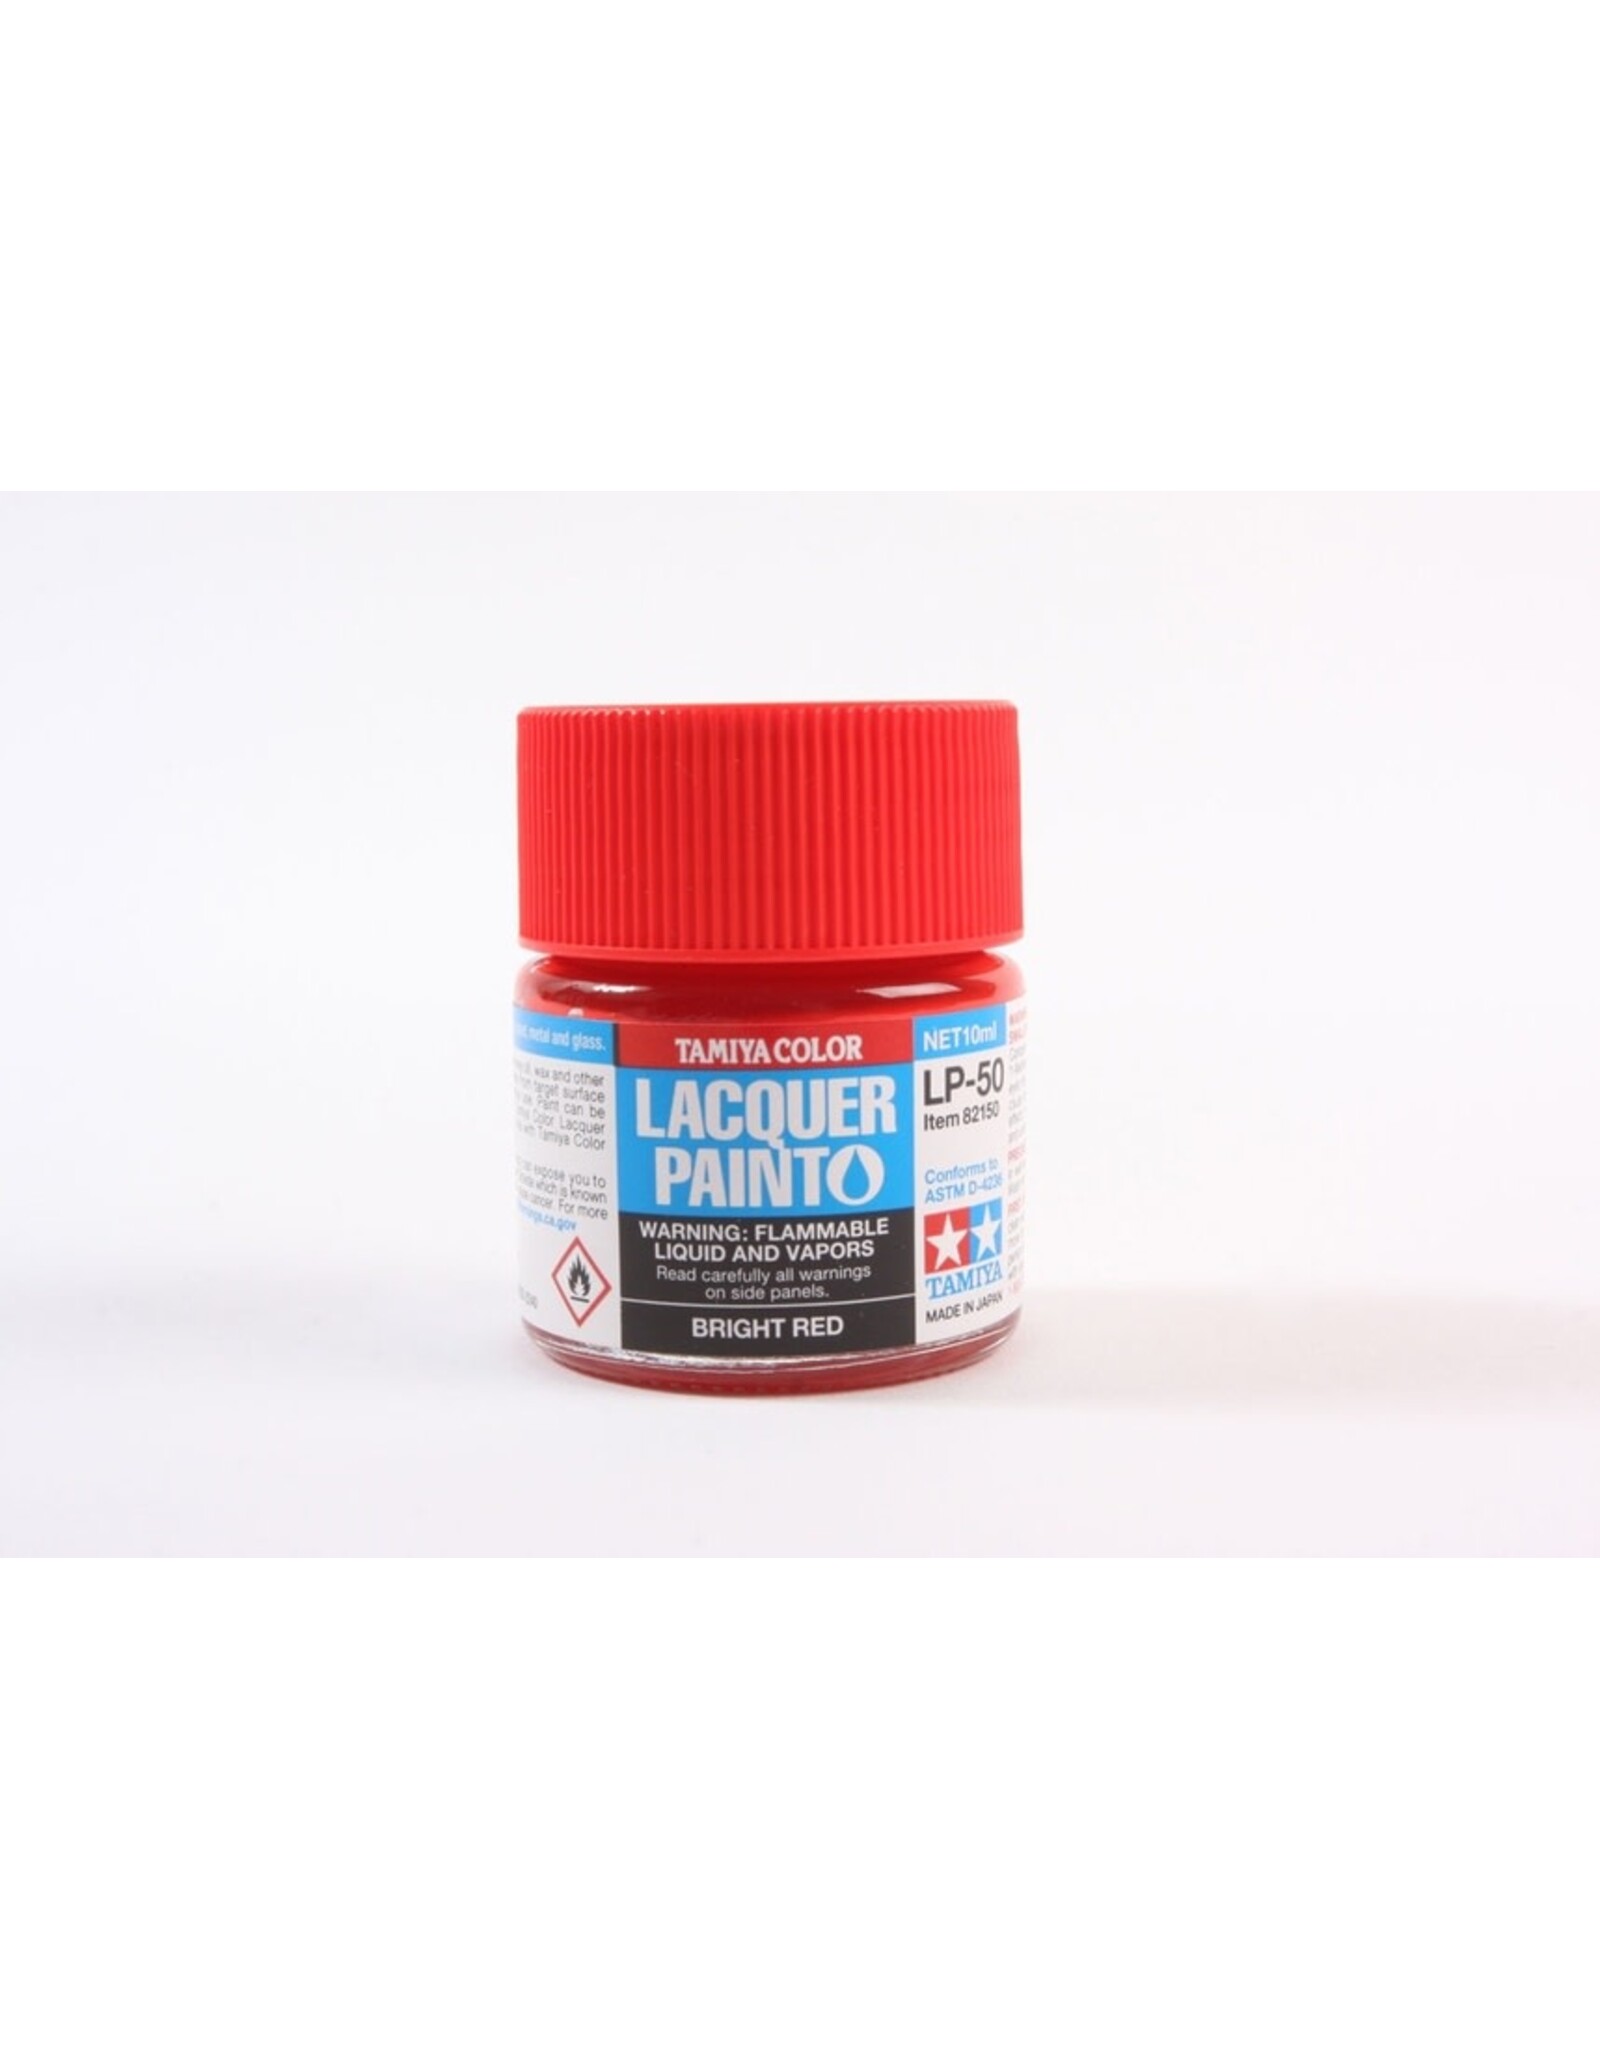 Tamiya Lacquer Paint LP-50 Bright Red 10ml Bottle